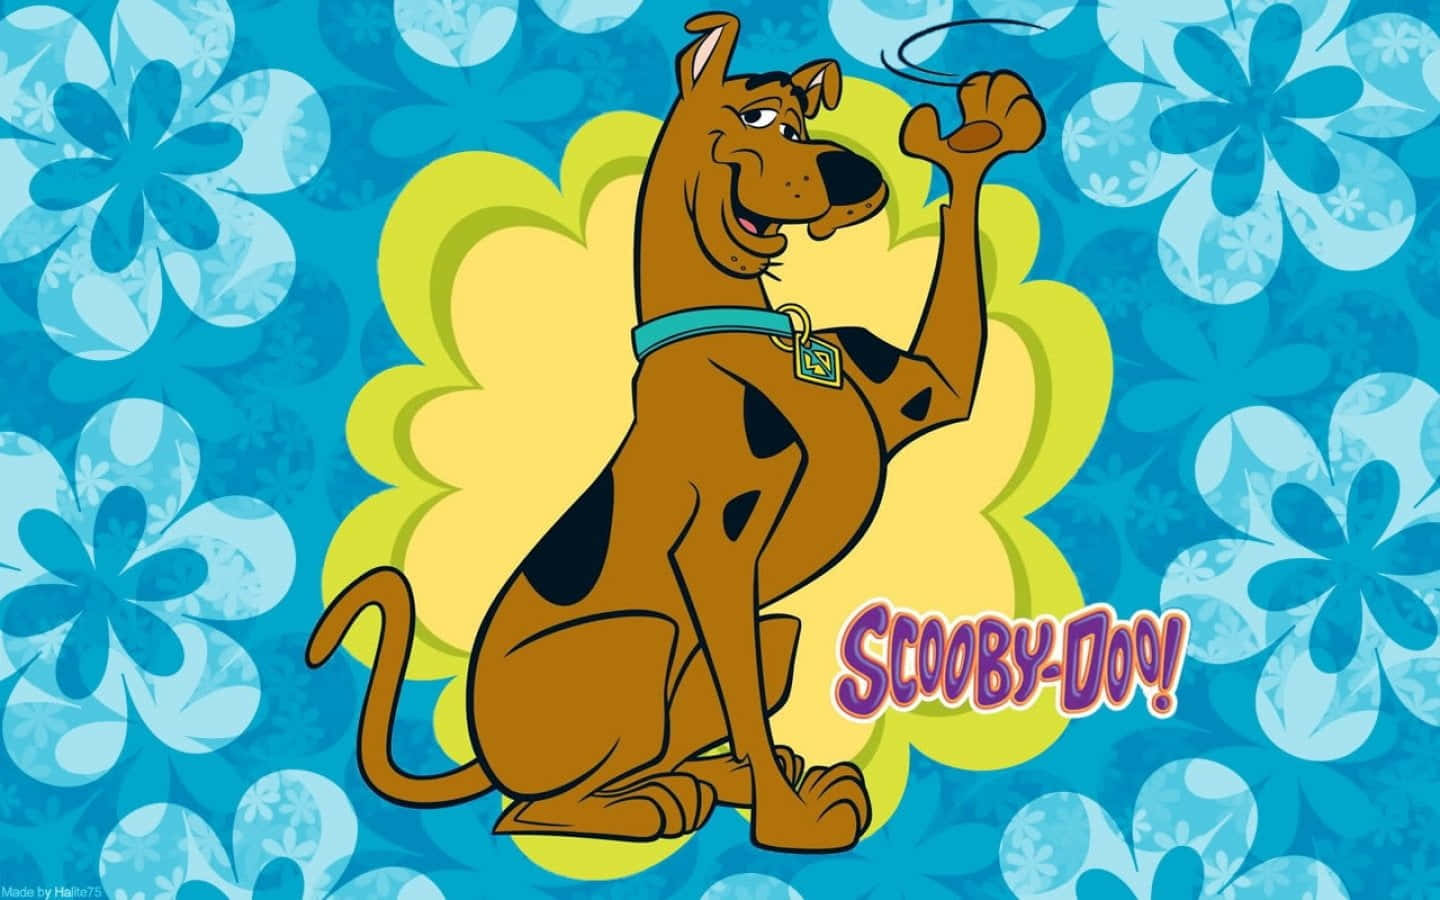 "Scooby-Doo and the Mystery Inc. gang are always ready for an adventure!"